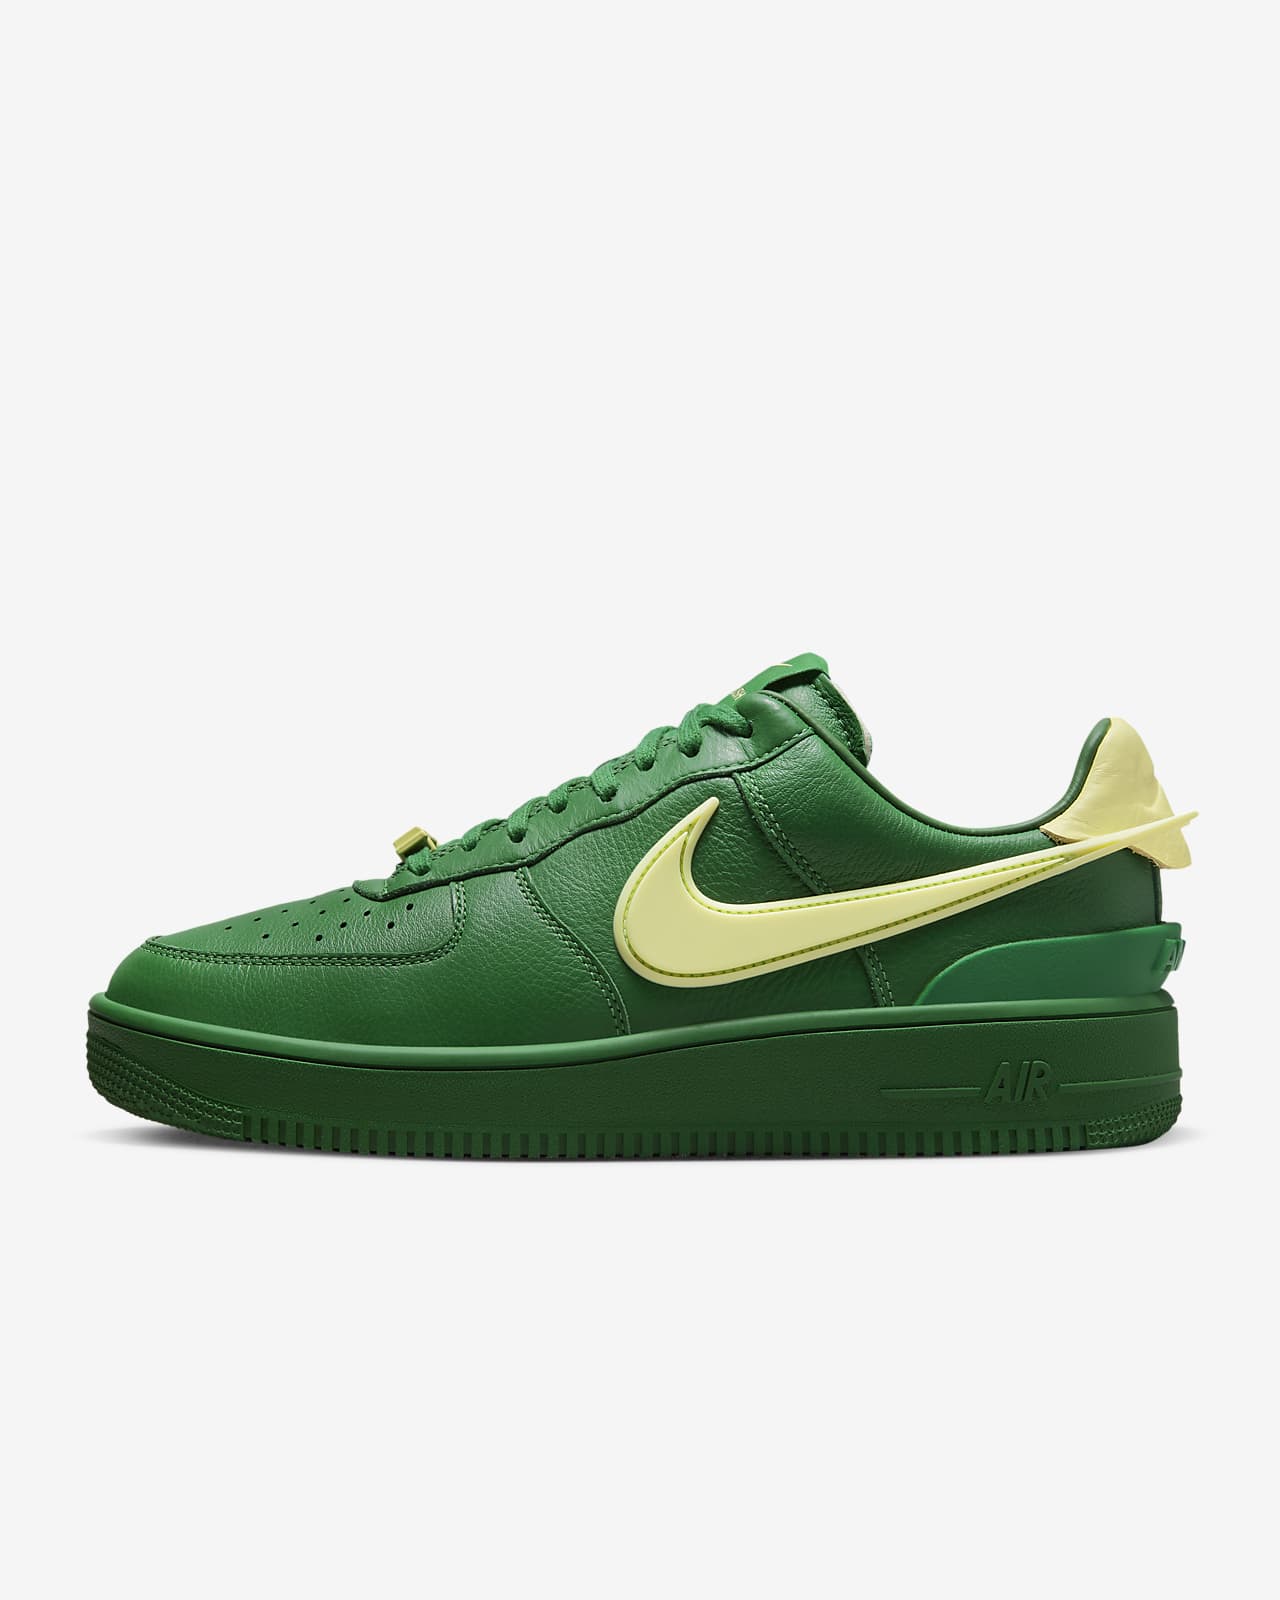 Air Force 1 x Men's Shoes. ID